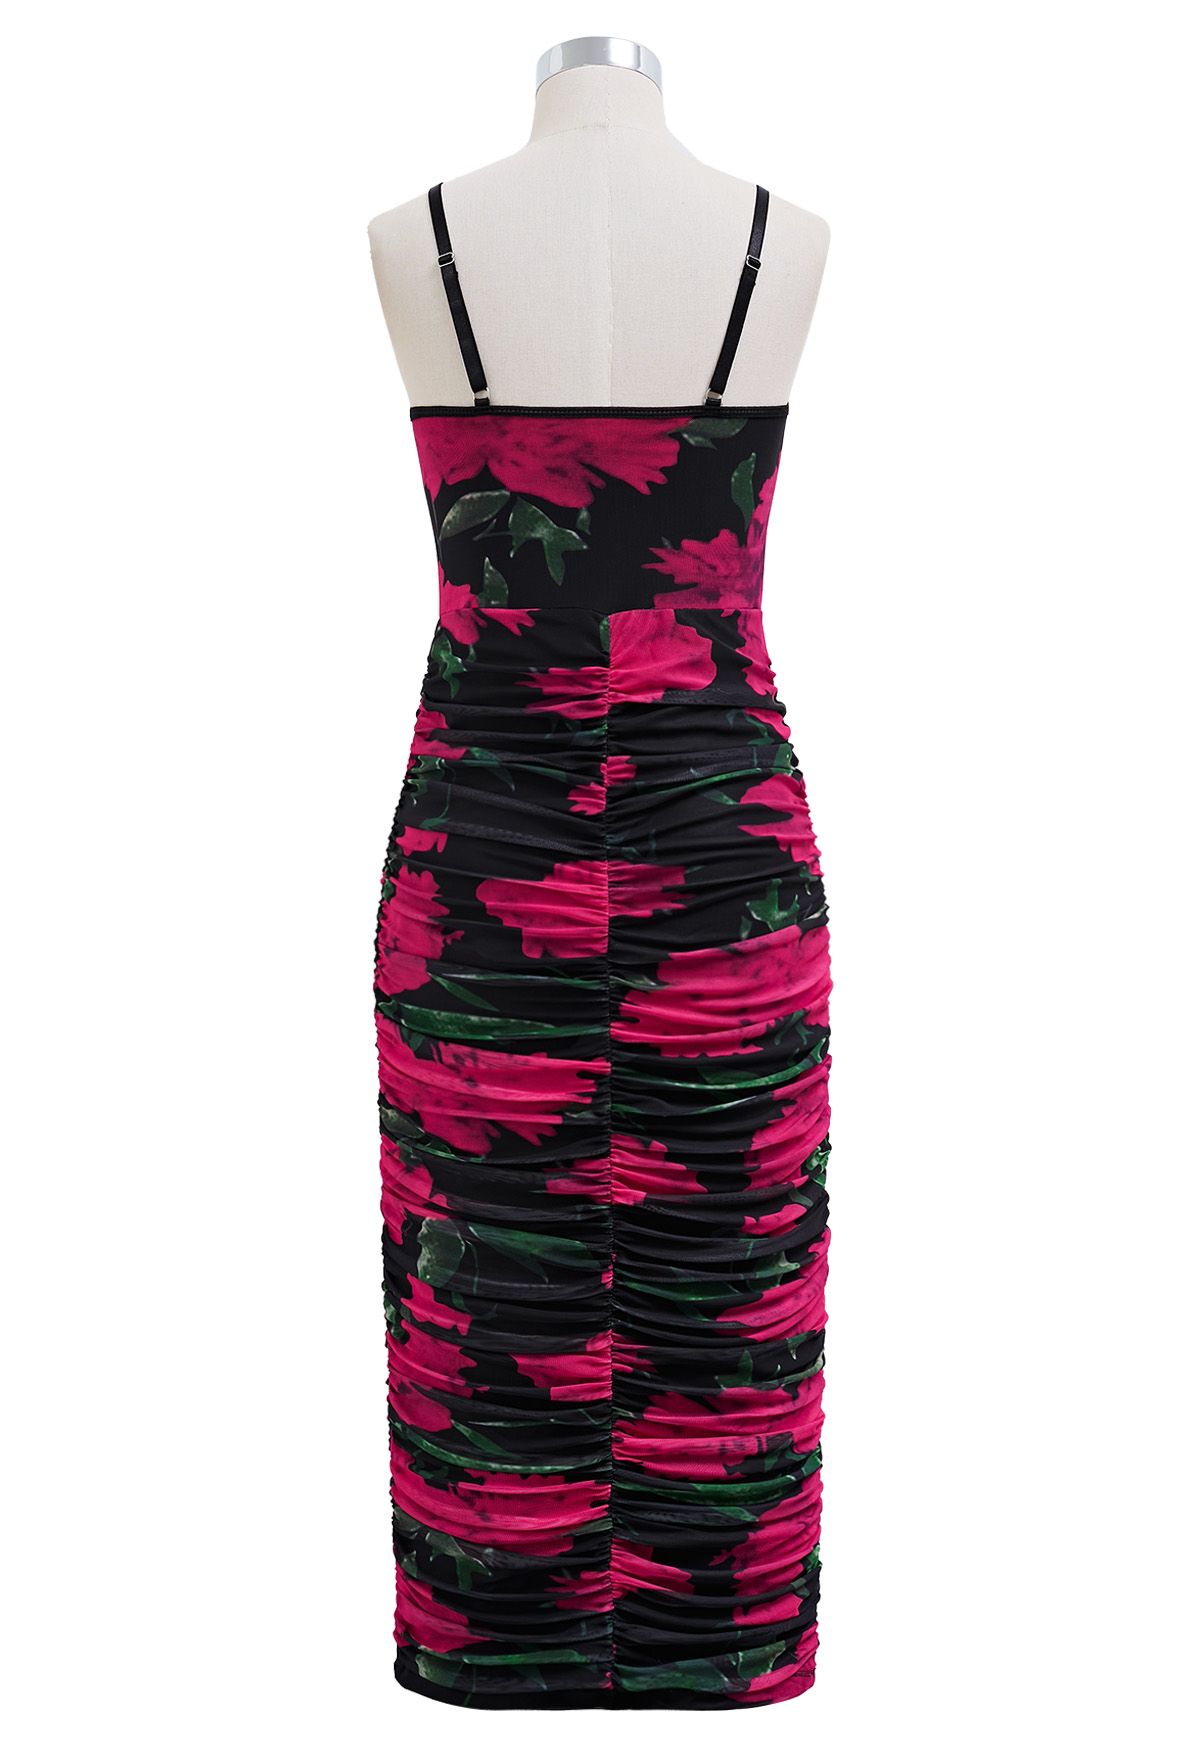 Hot Pink Floral Ruched Mesh Cami Dress